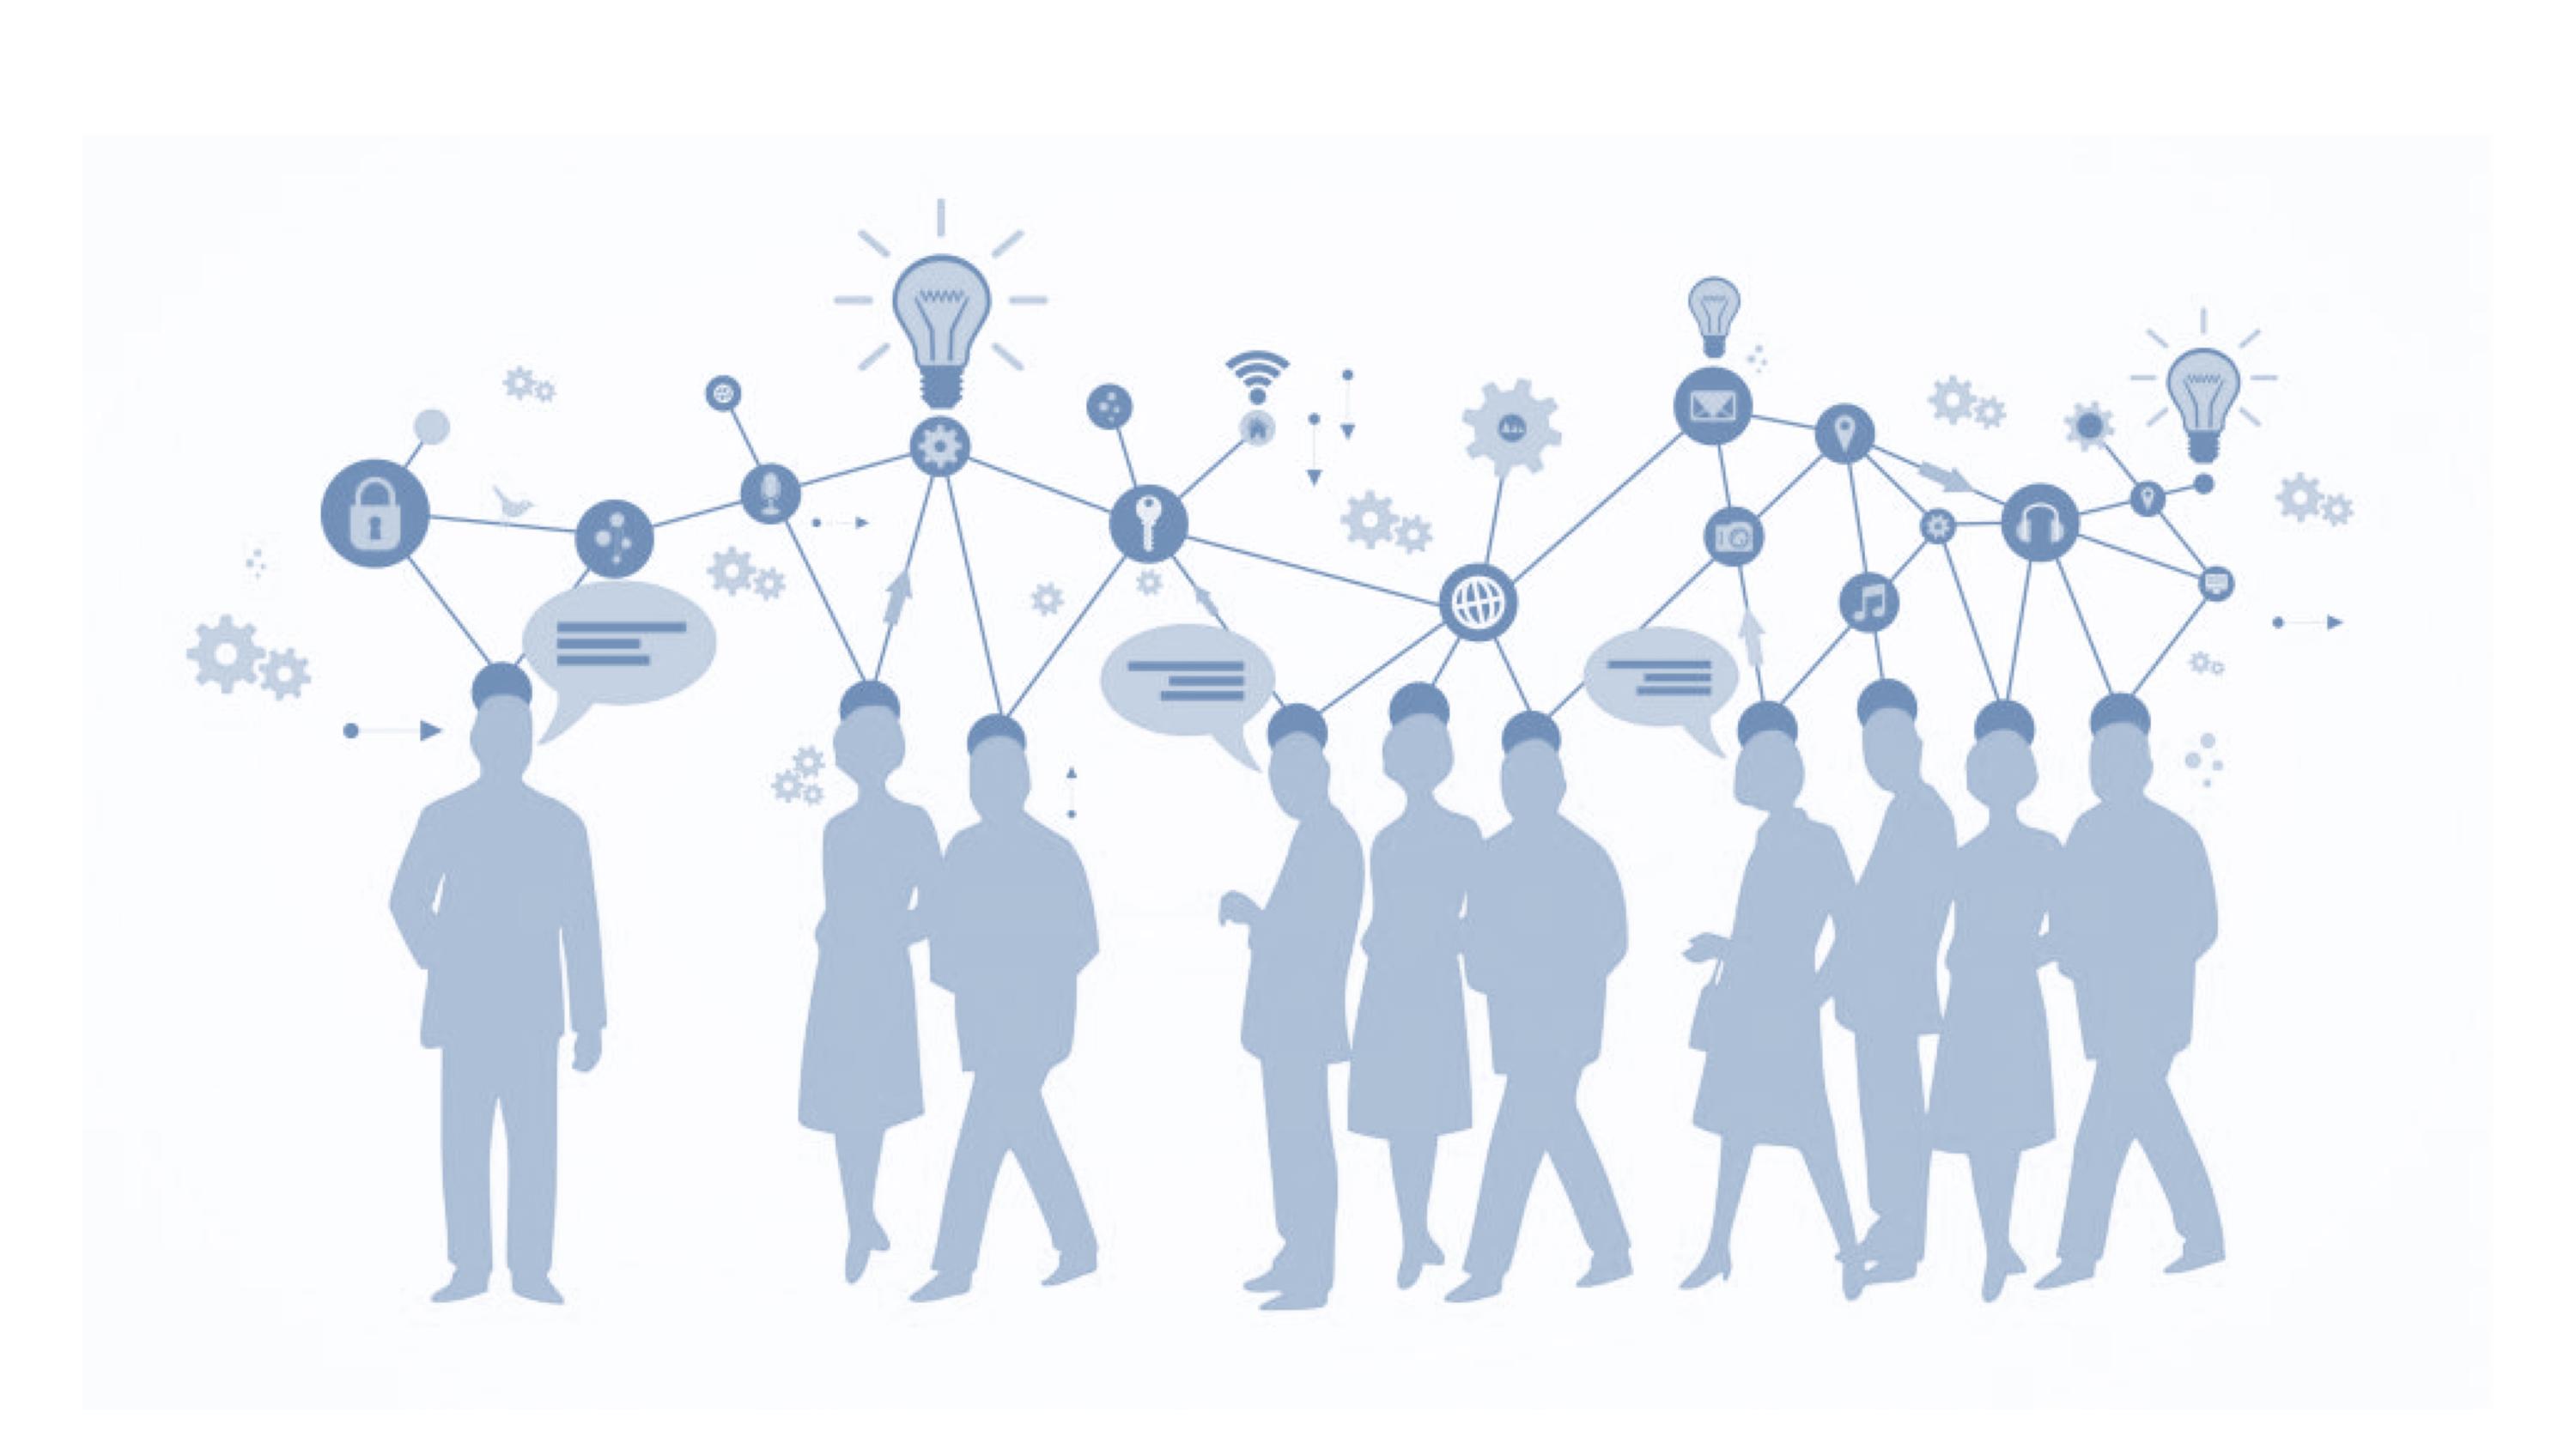 silhouettes of people networking - blue and white